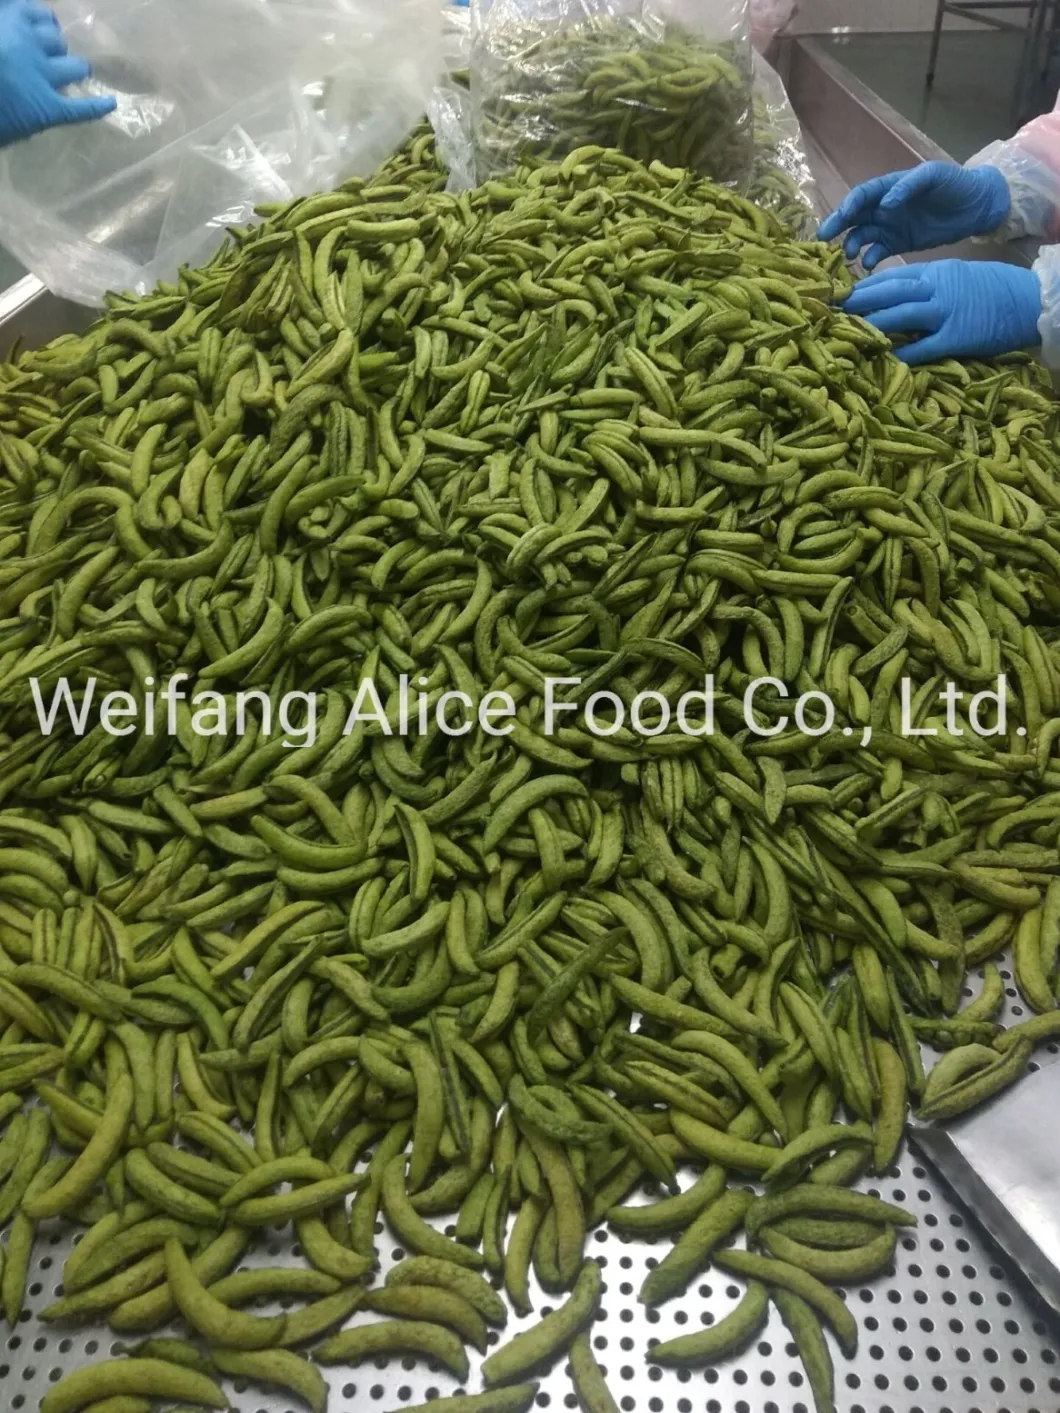 China Wholesale Cheap Price Healthy Snack Food Vegetables Low Calories Fried Sweet Pea